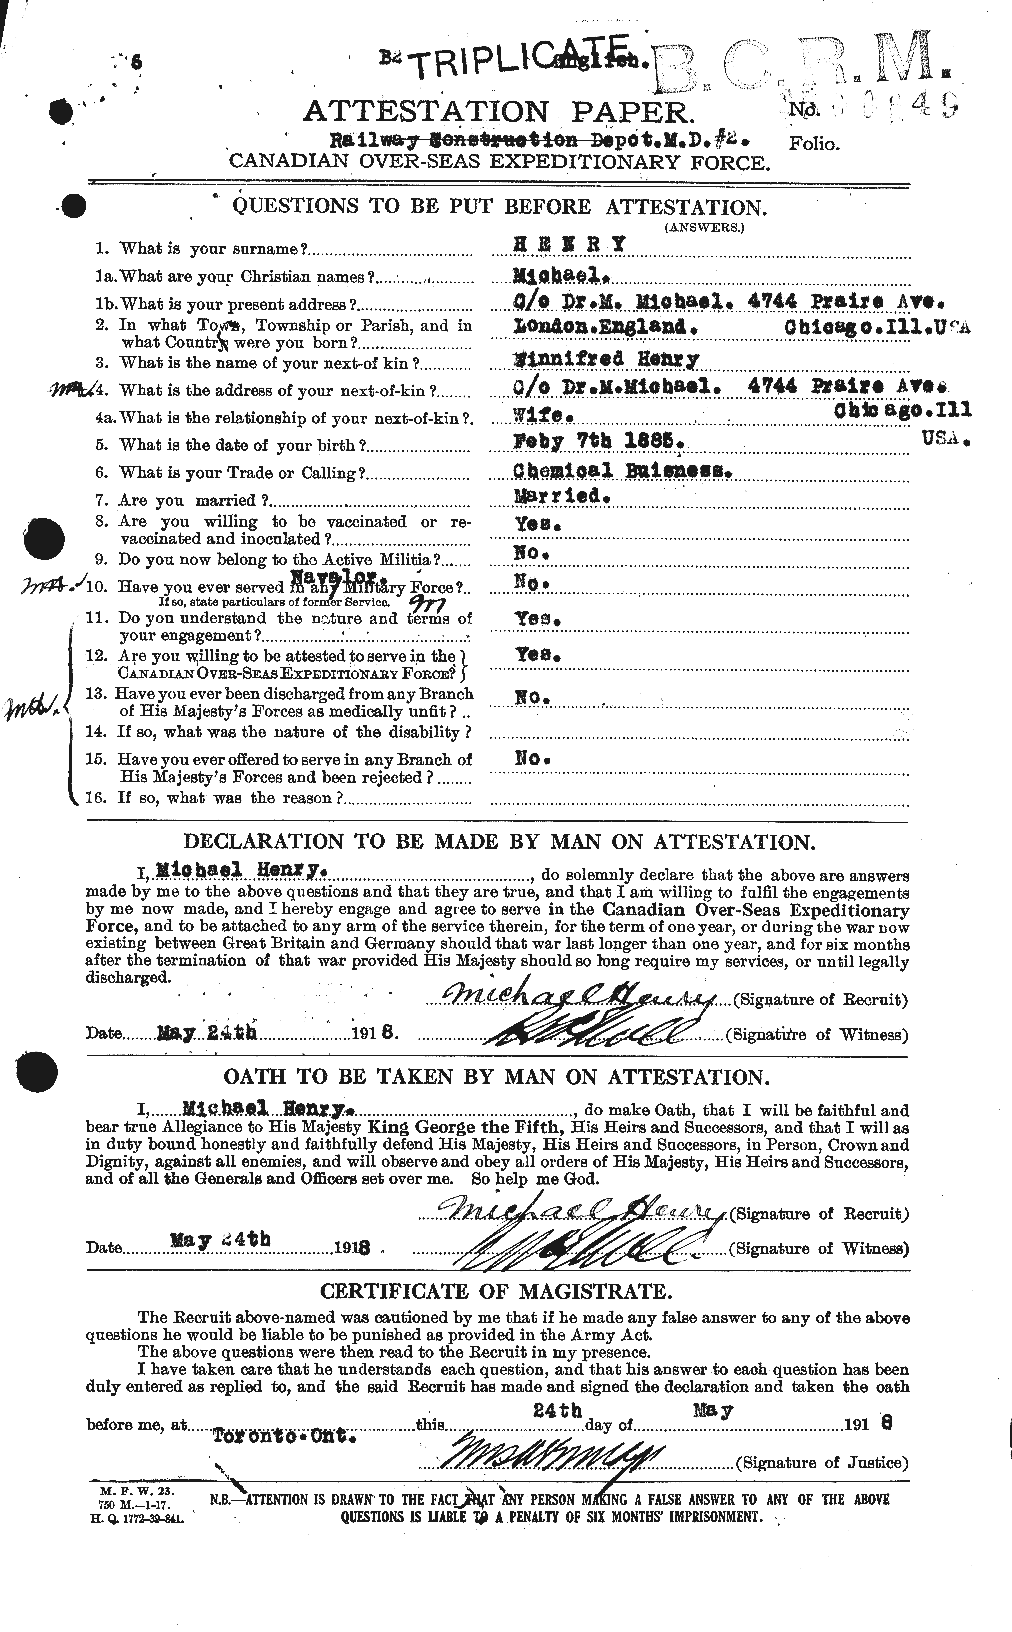 Personnel Records of the First World War - CEF 387667a